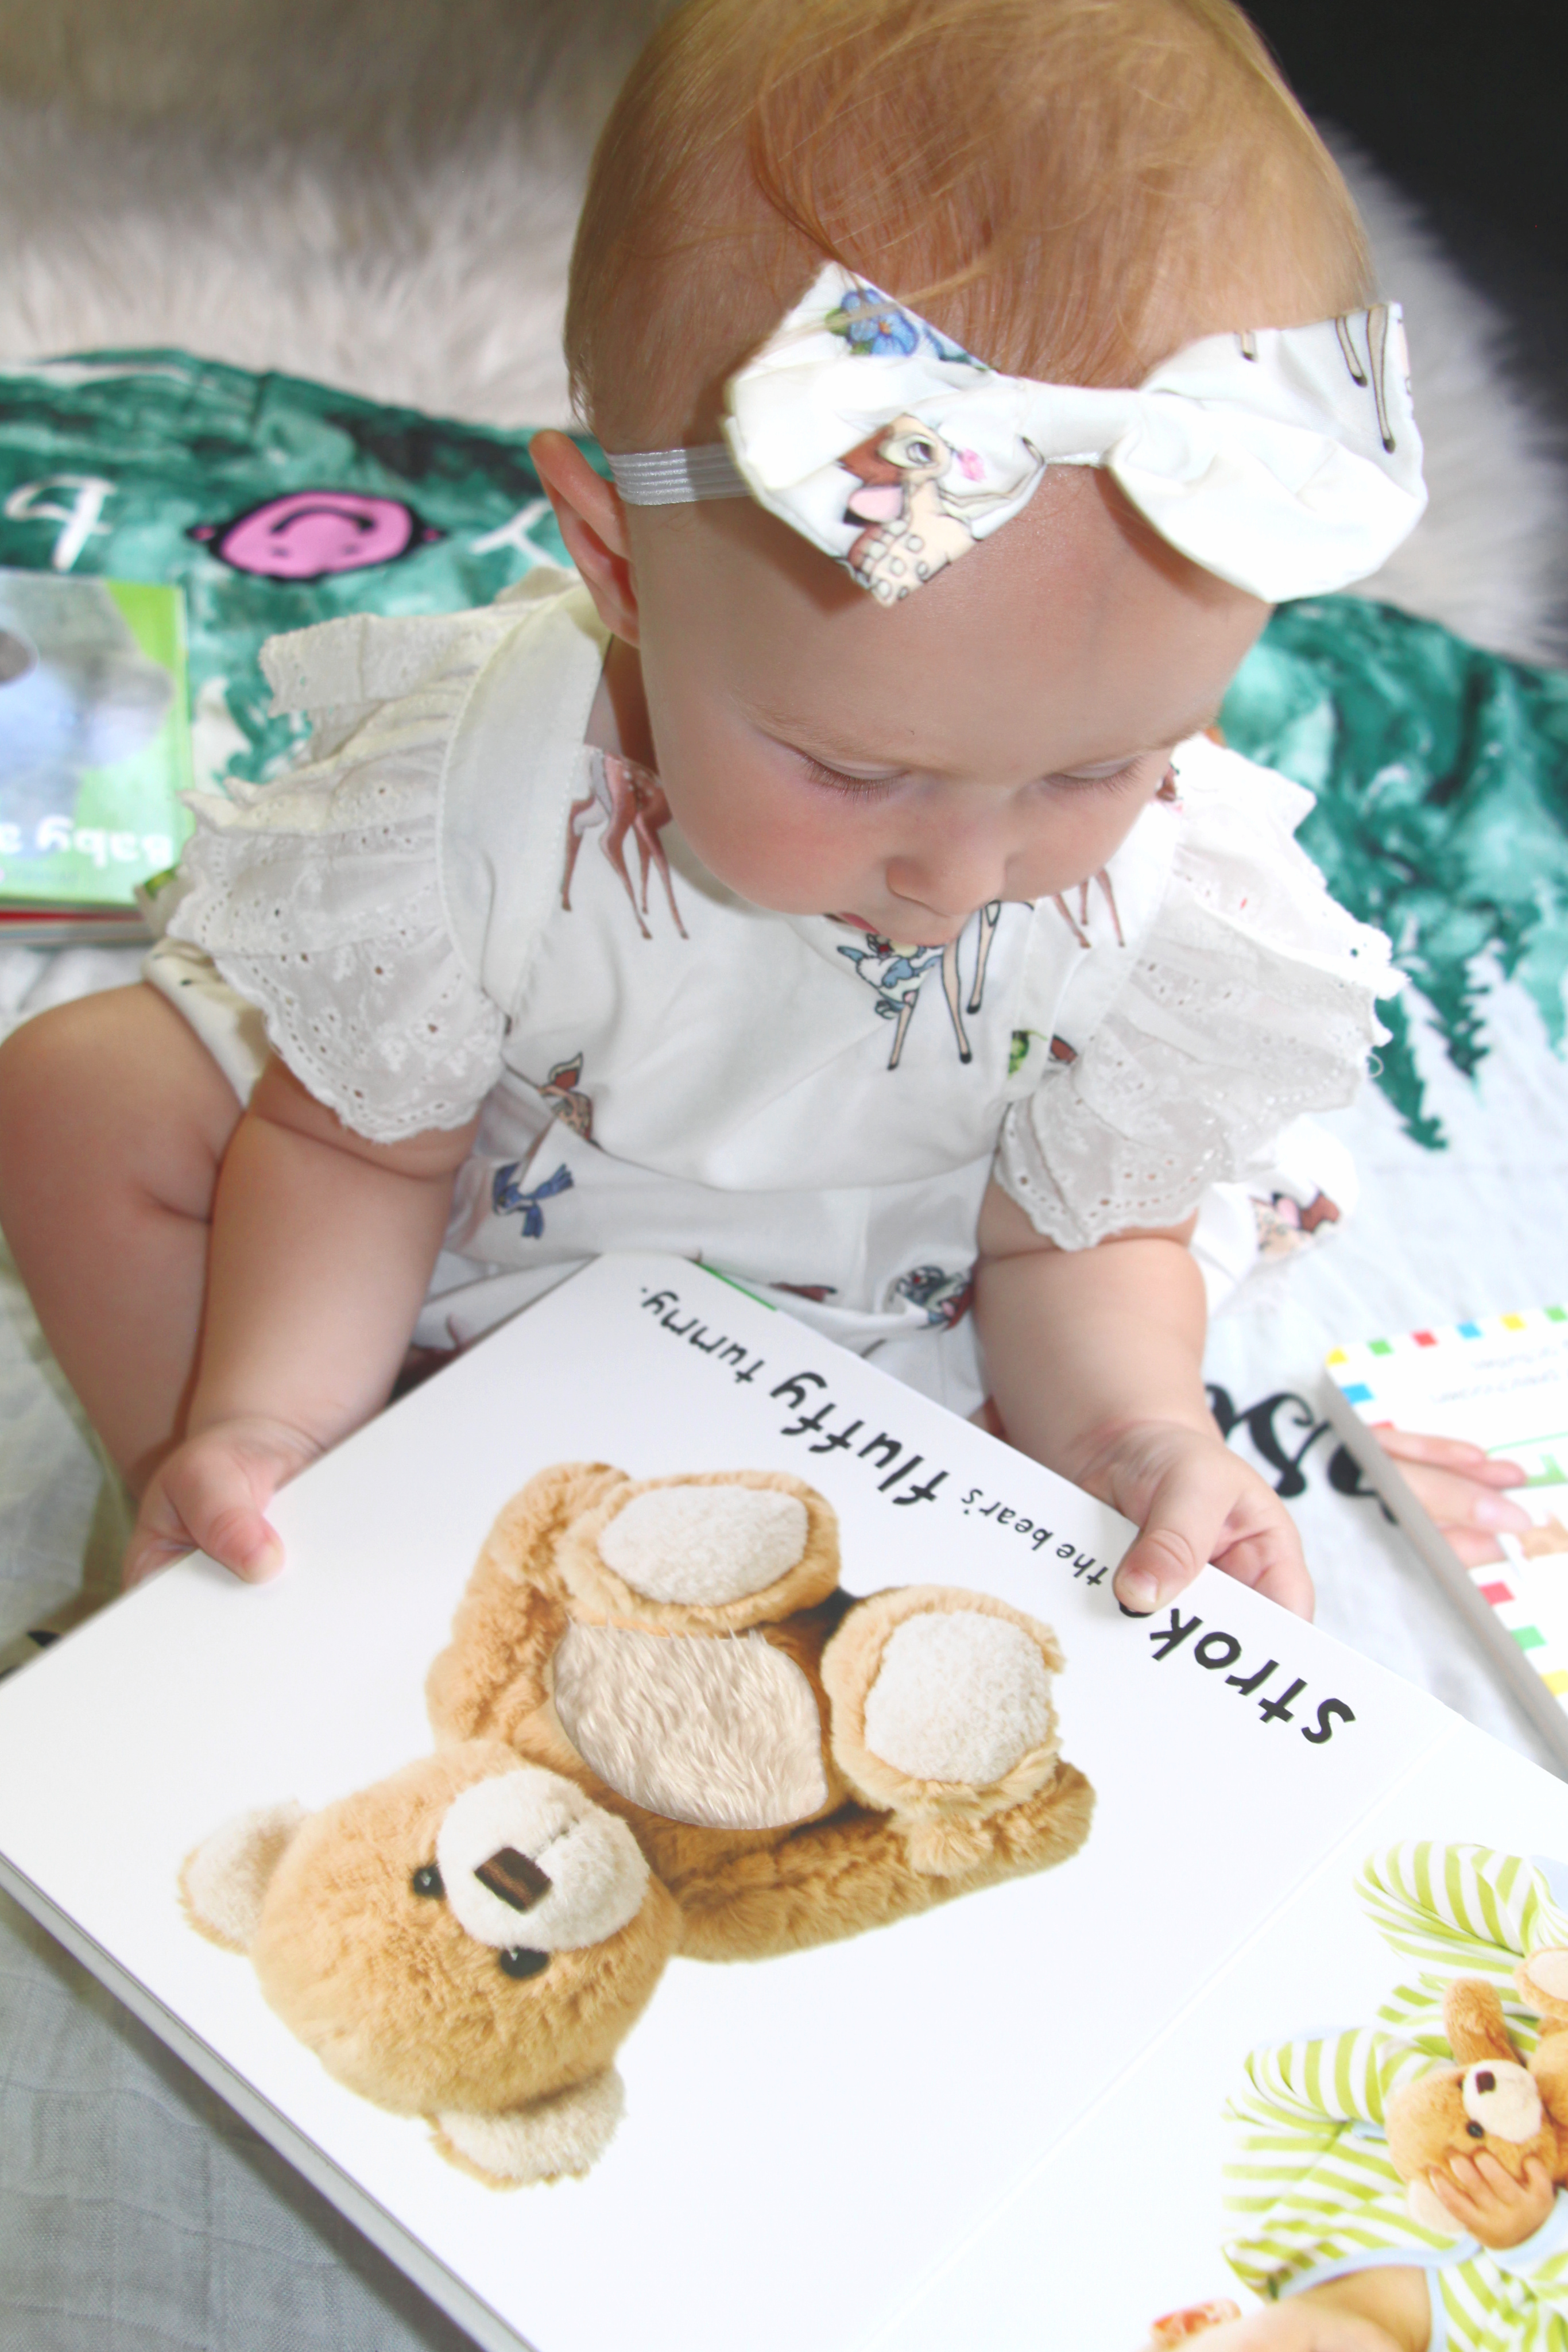 When Should You Start Reading To Your Baby?